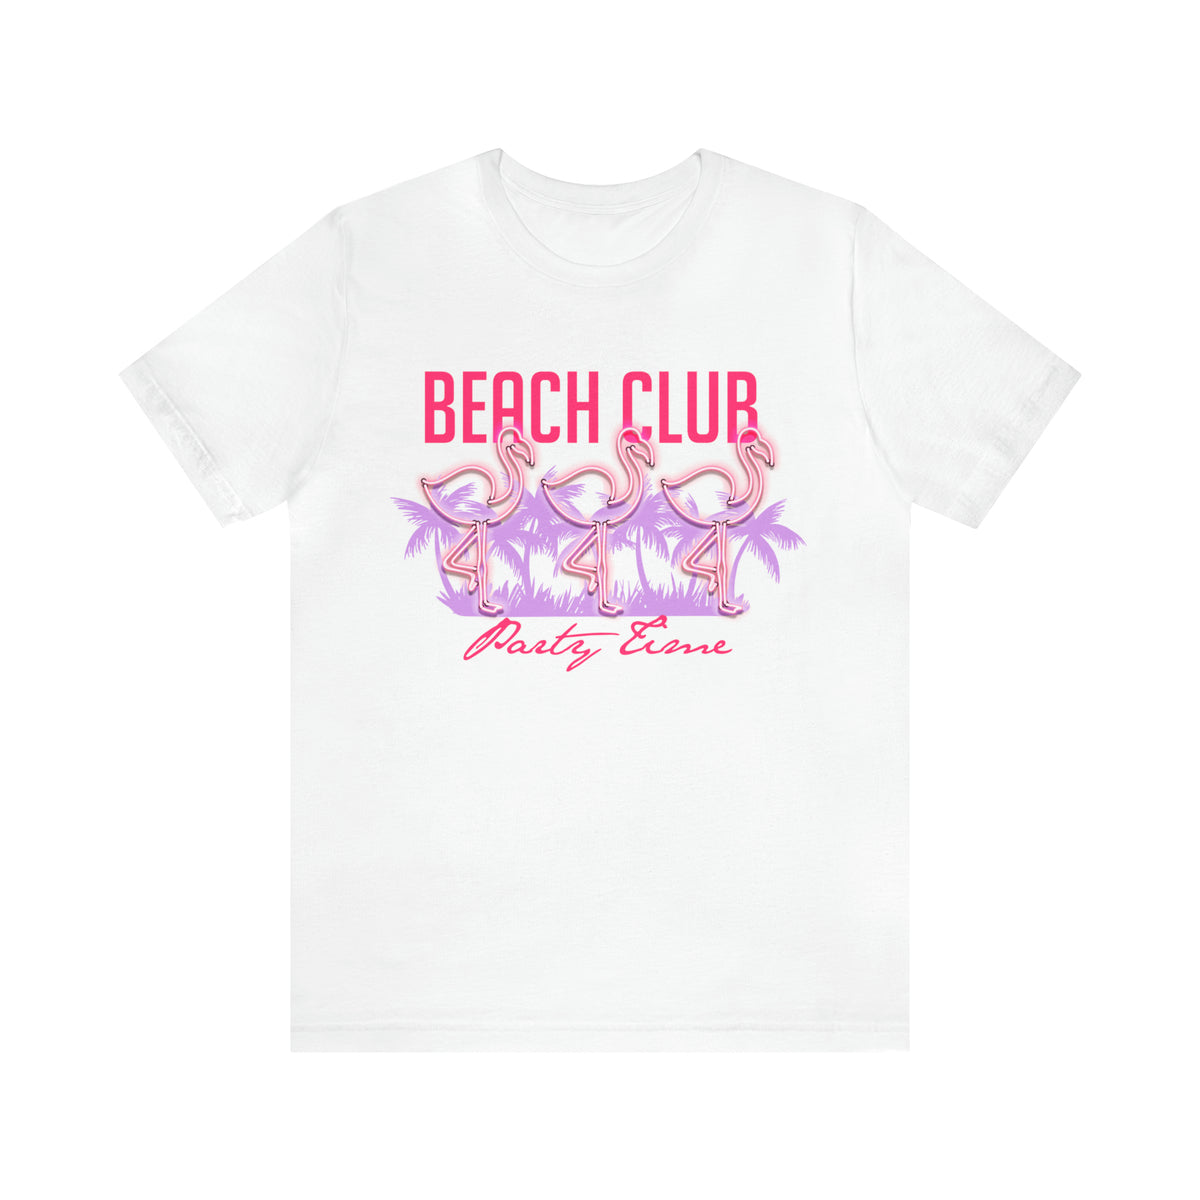 Beach Club Unisex Jersey Short Sleeve Tee: Your Ultimate Comfort and Style Statement